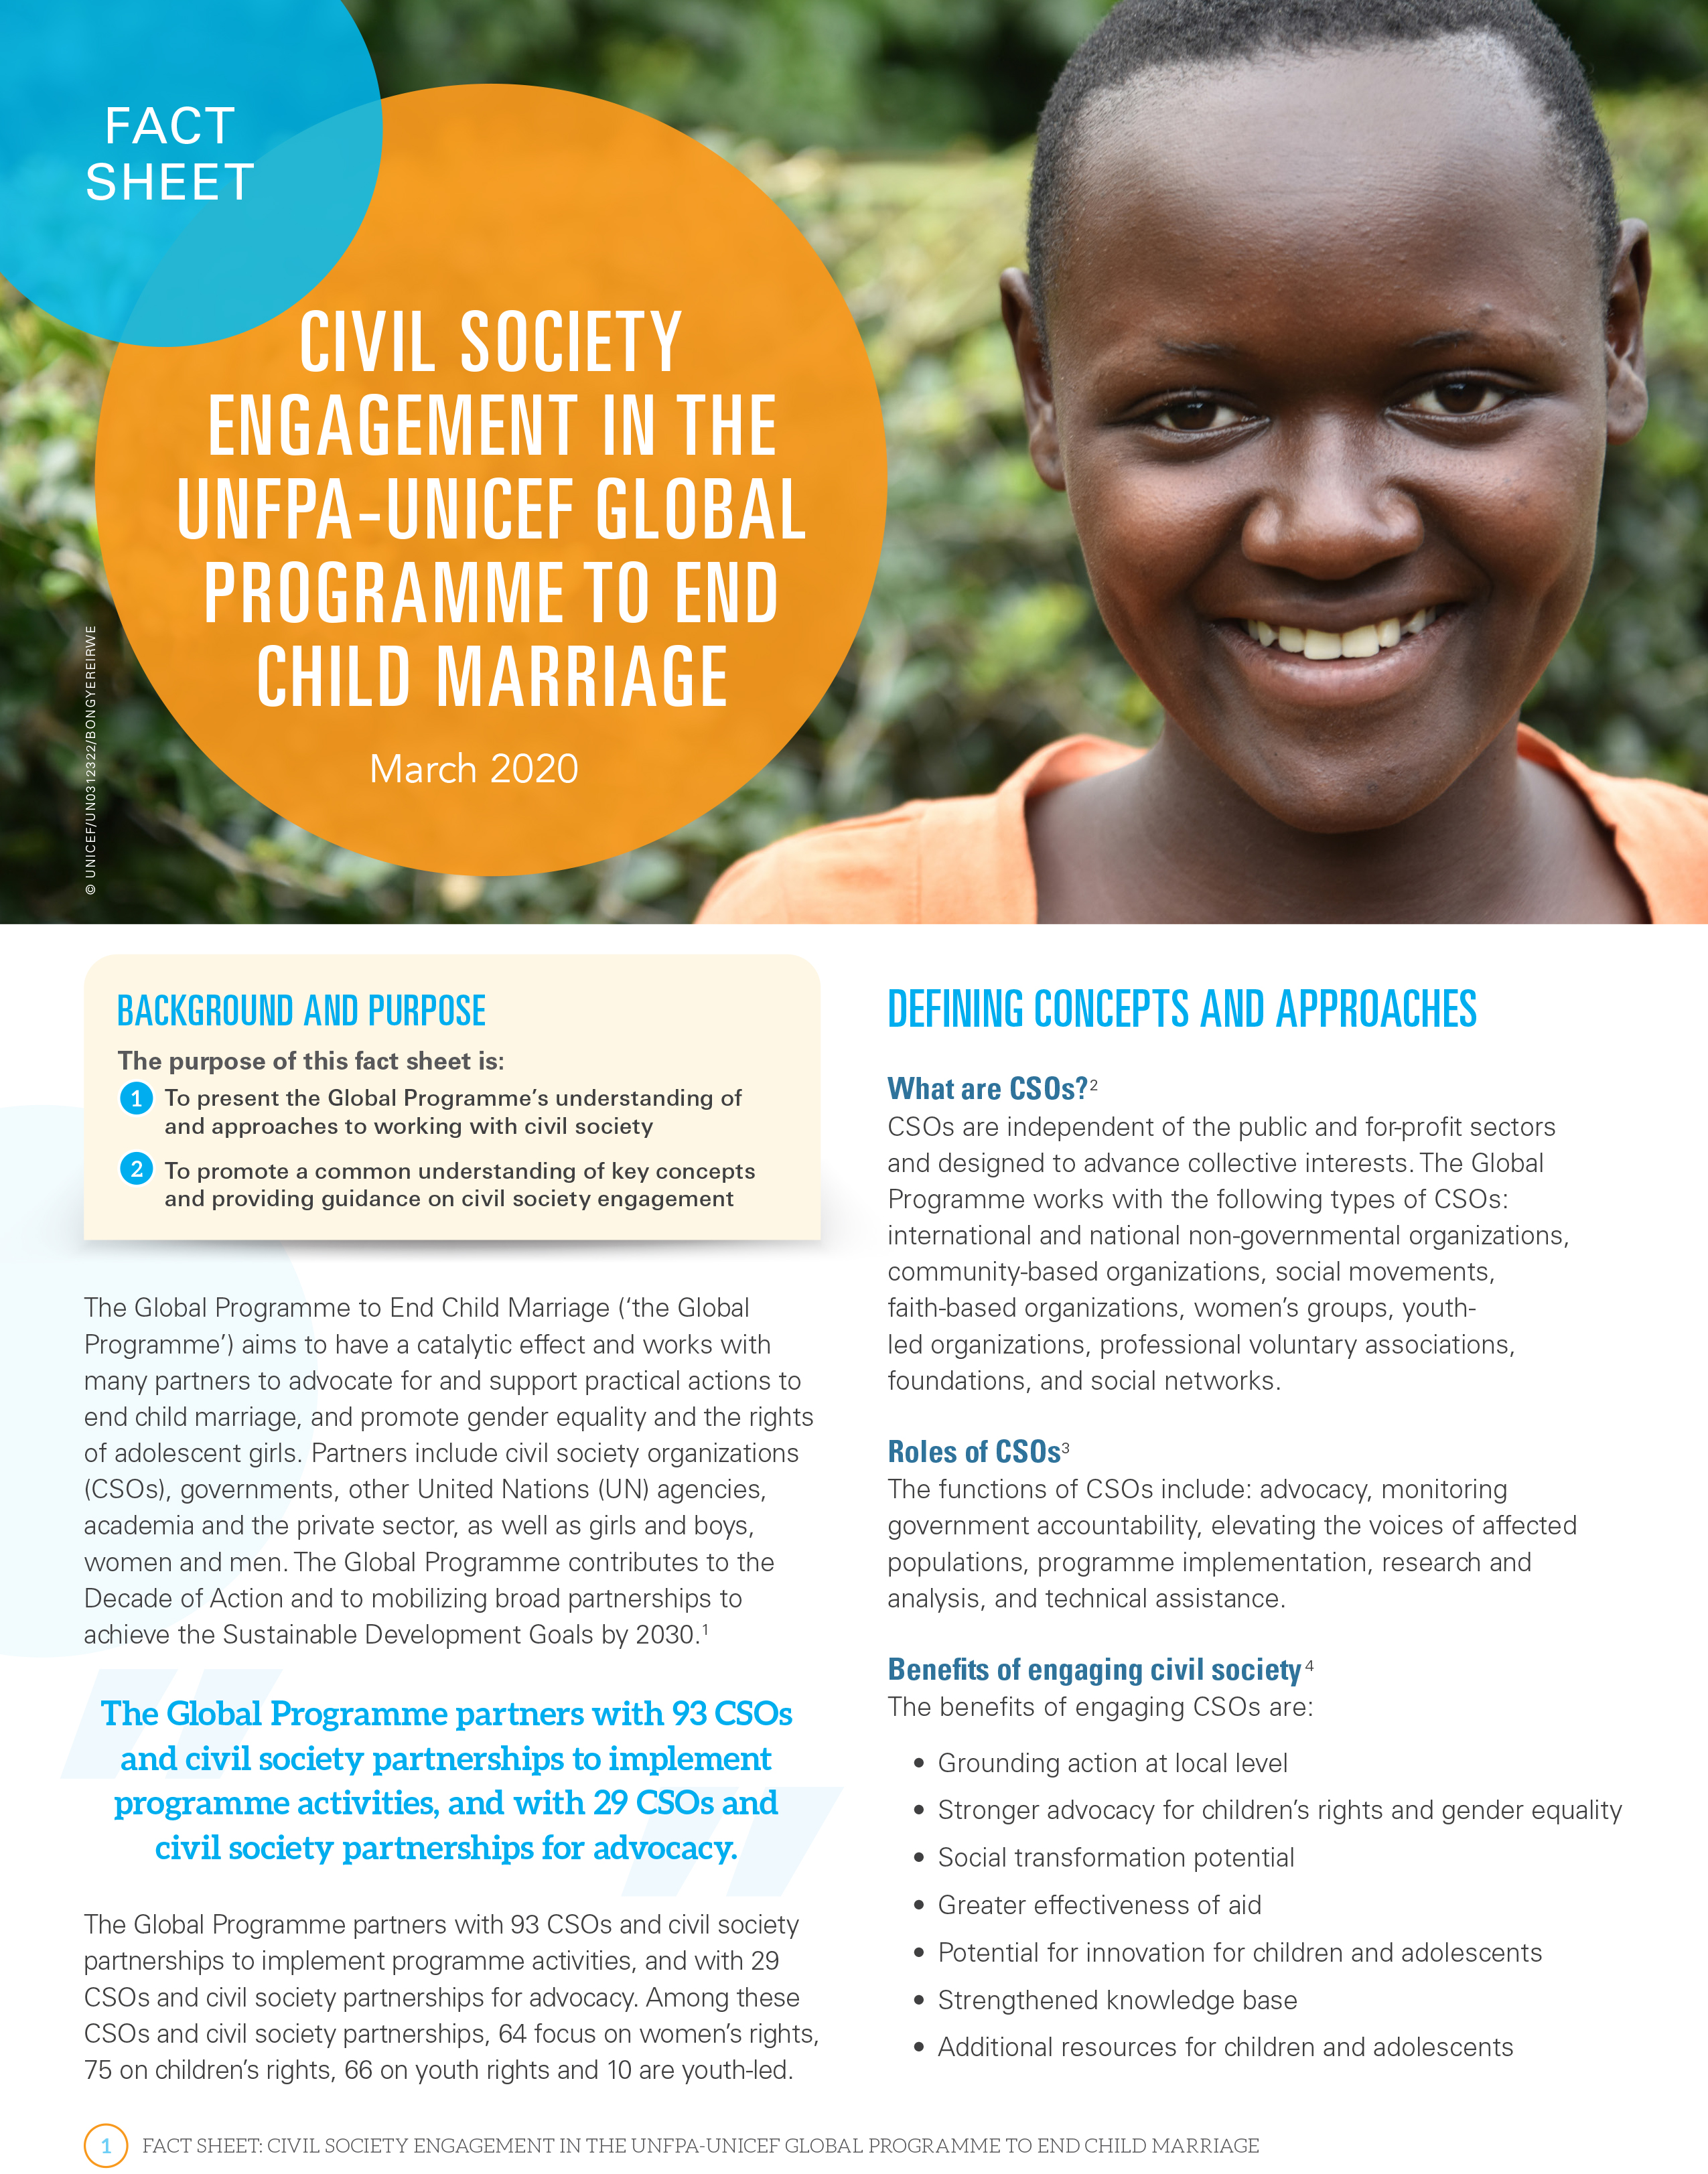 Fact sheet: Civil-society engagement in the Global Programme to End Child Marriage